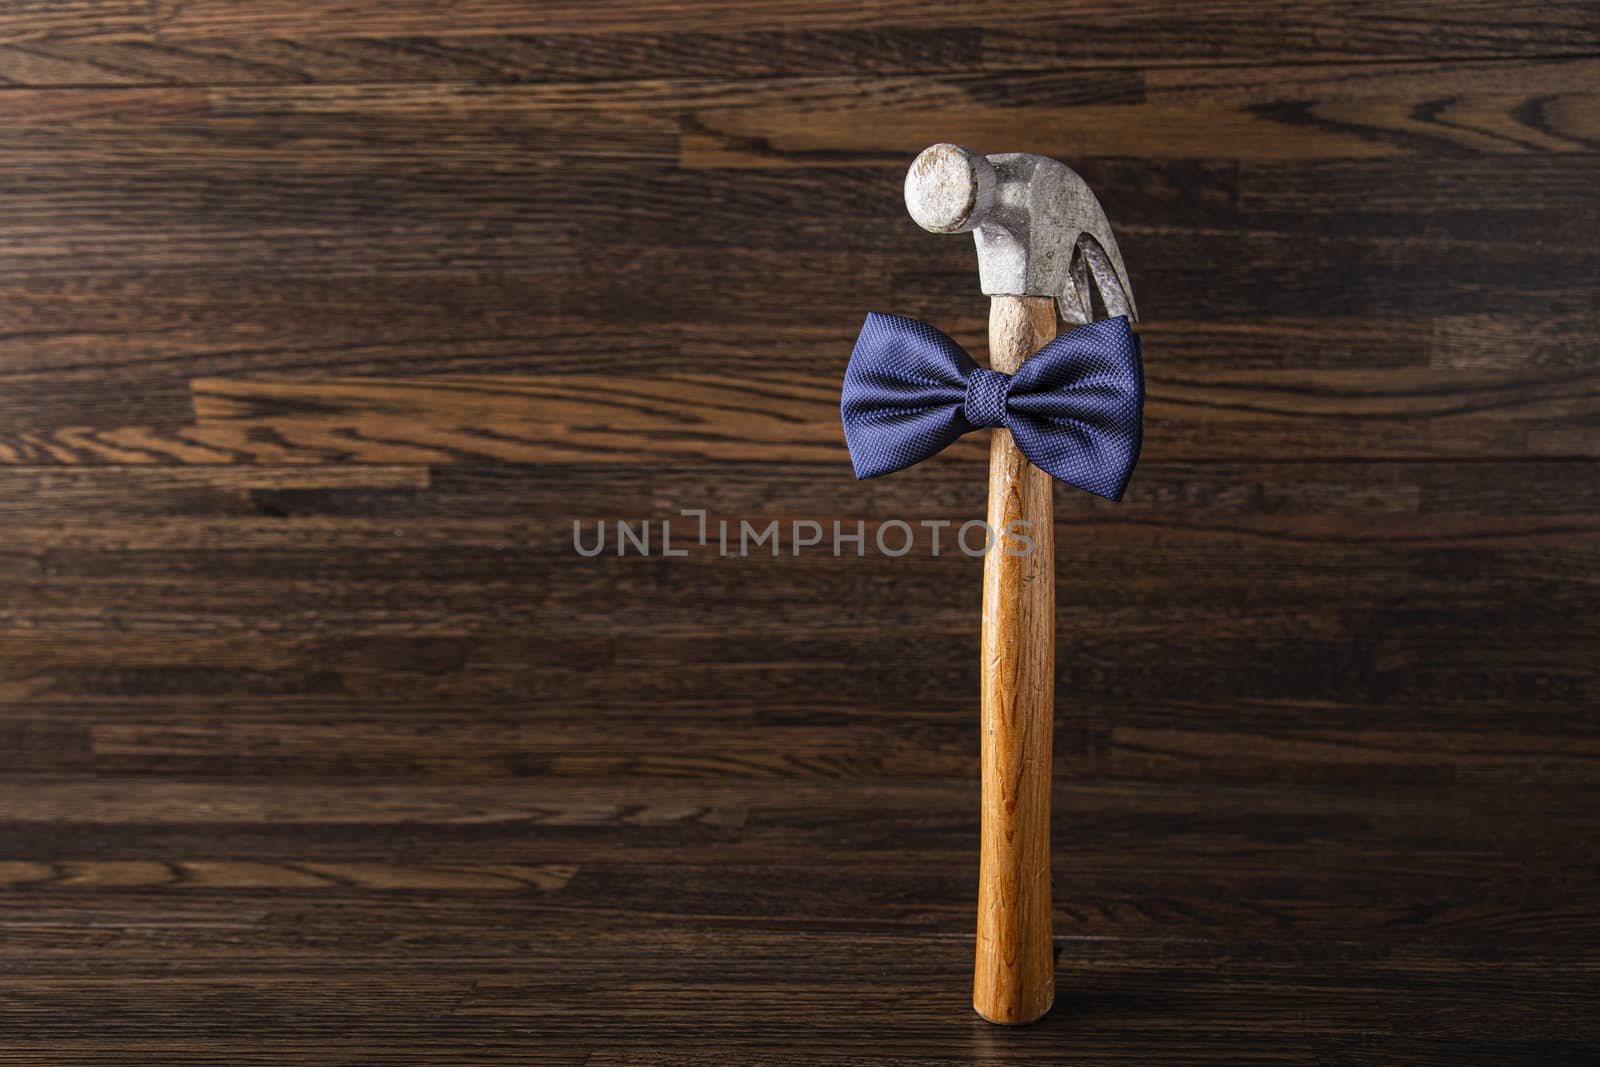 Old banged up hammer with a blue bowtie against a dark wood background